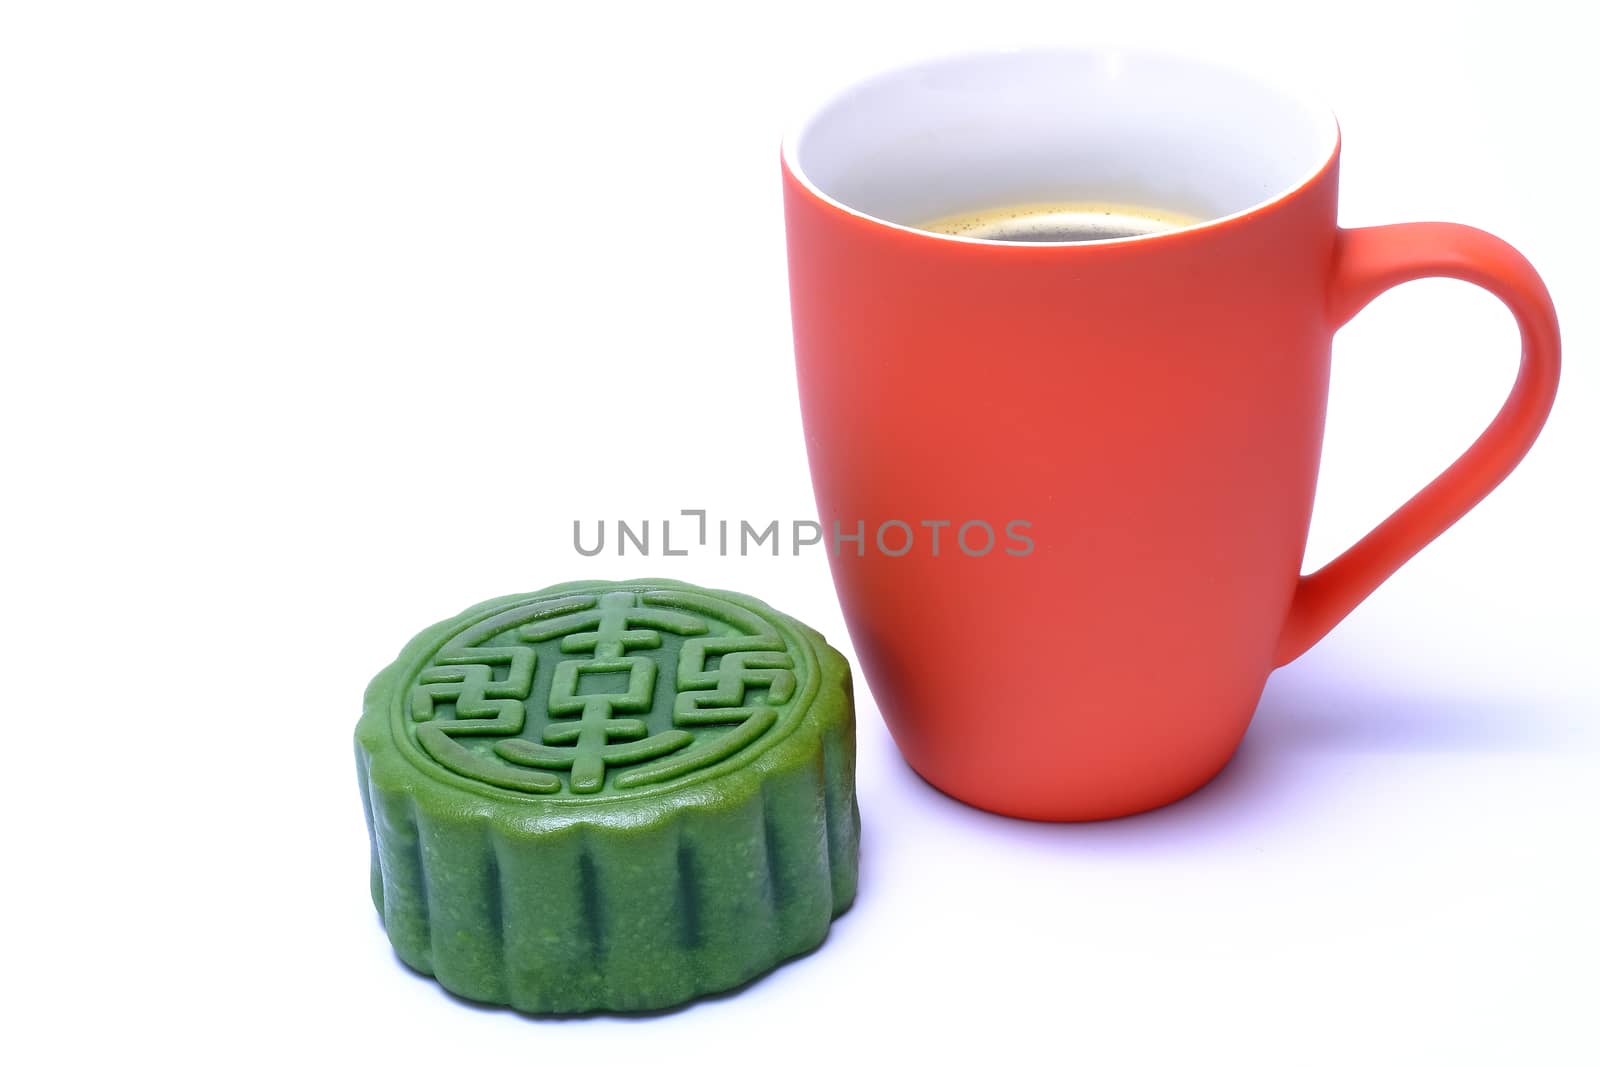 green tea flavor moon-cake and a mug of hot coffee isolated on white background